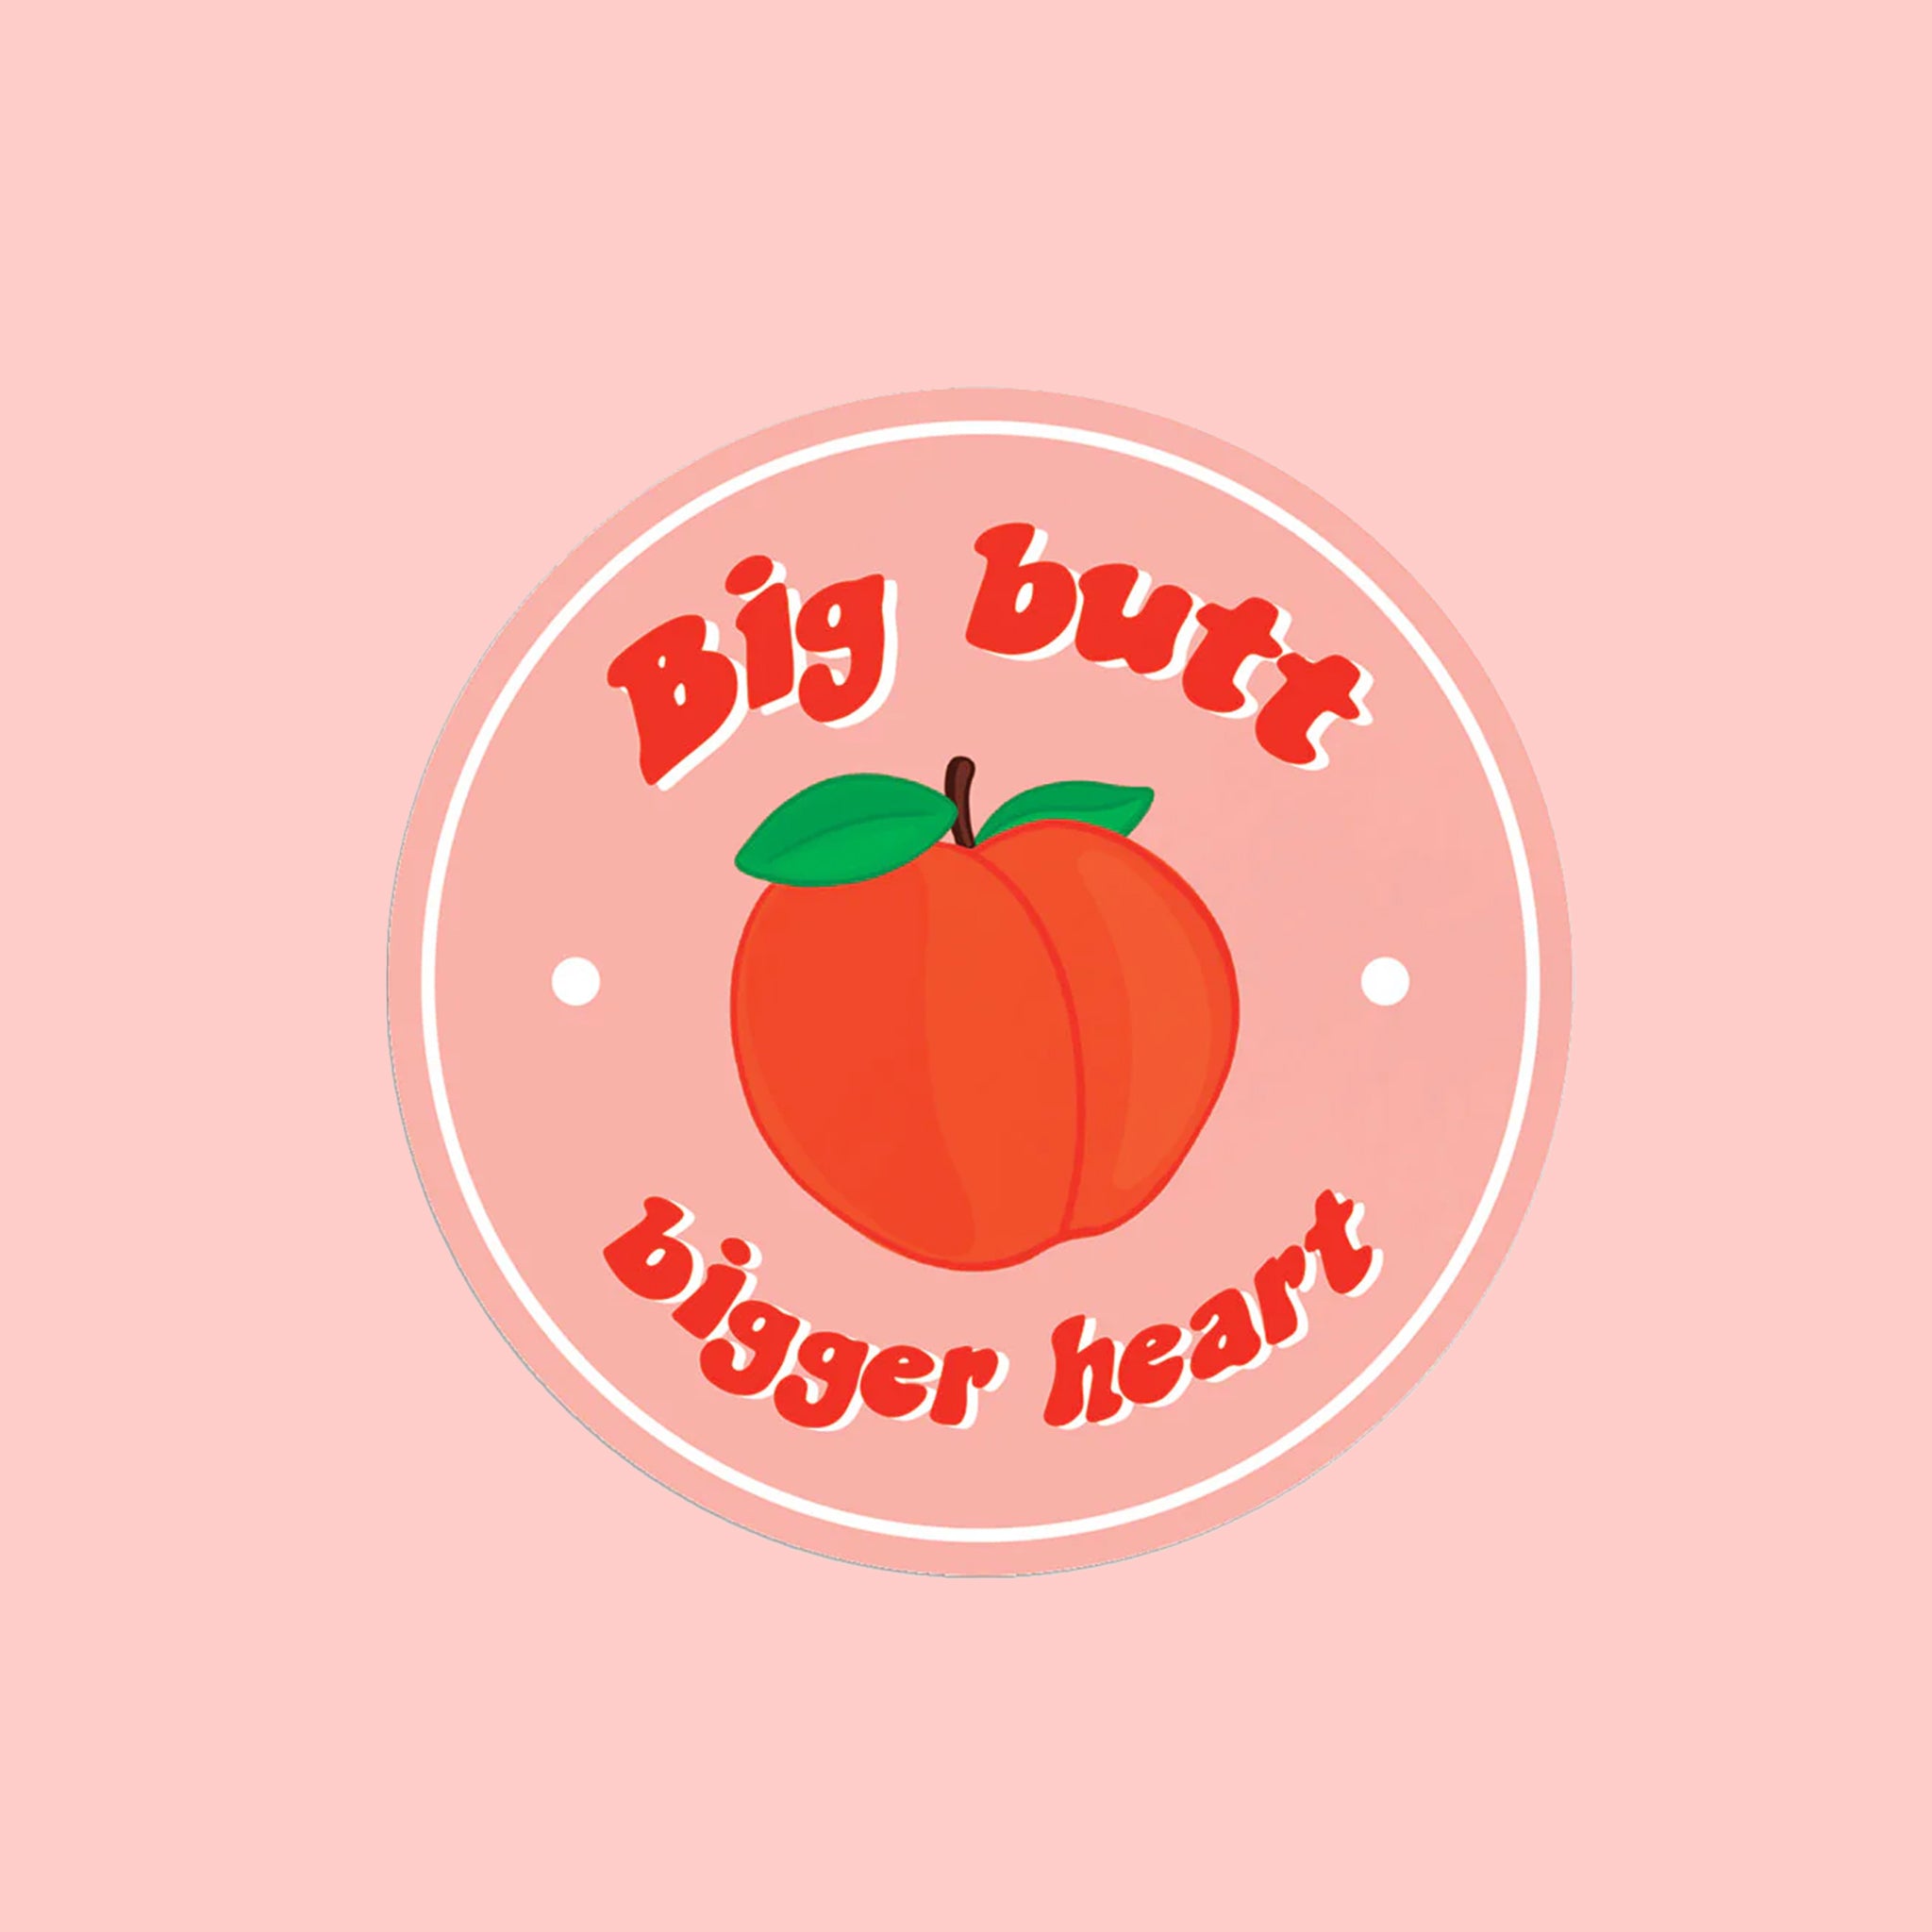 On a pink background is a pink circle sticker with text that reads, "Big butt bigger heart" and a peach illustration in the center. 